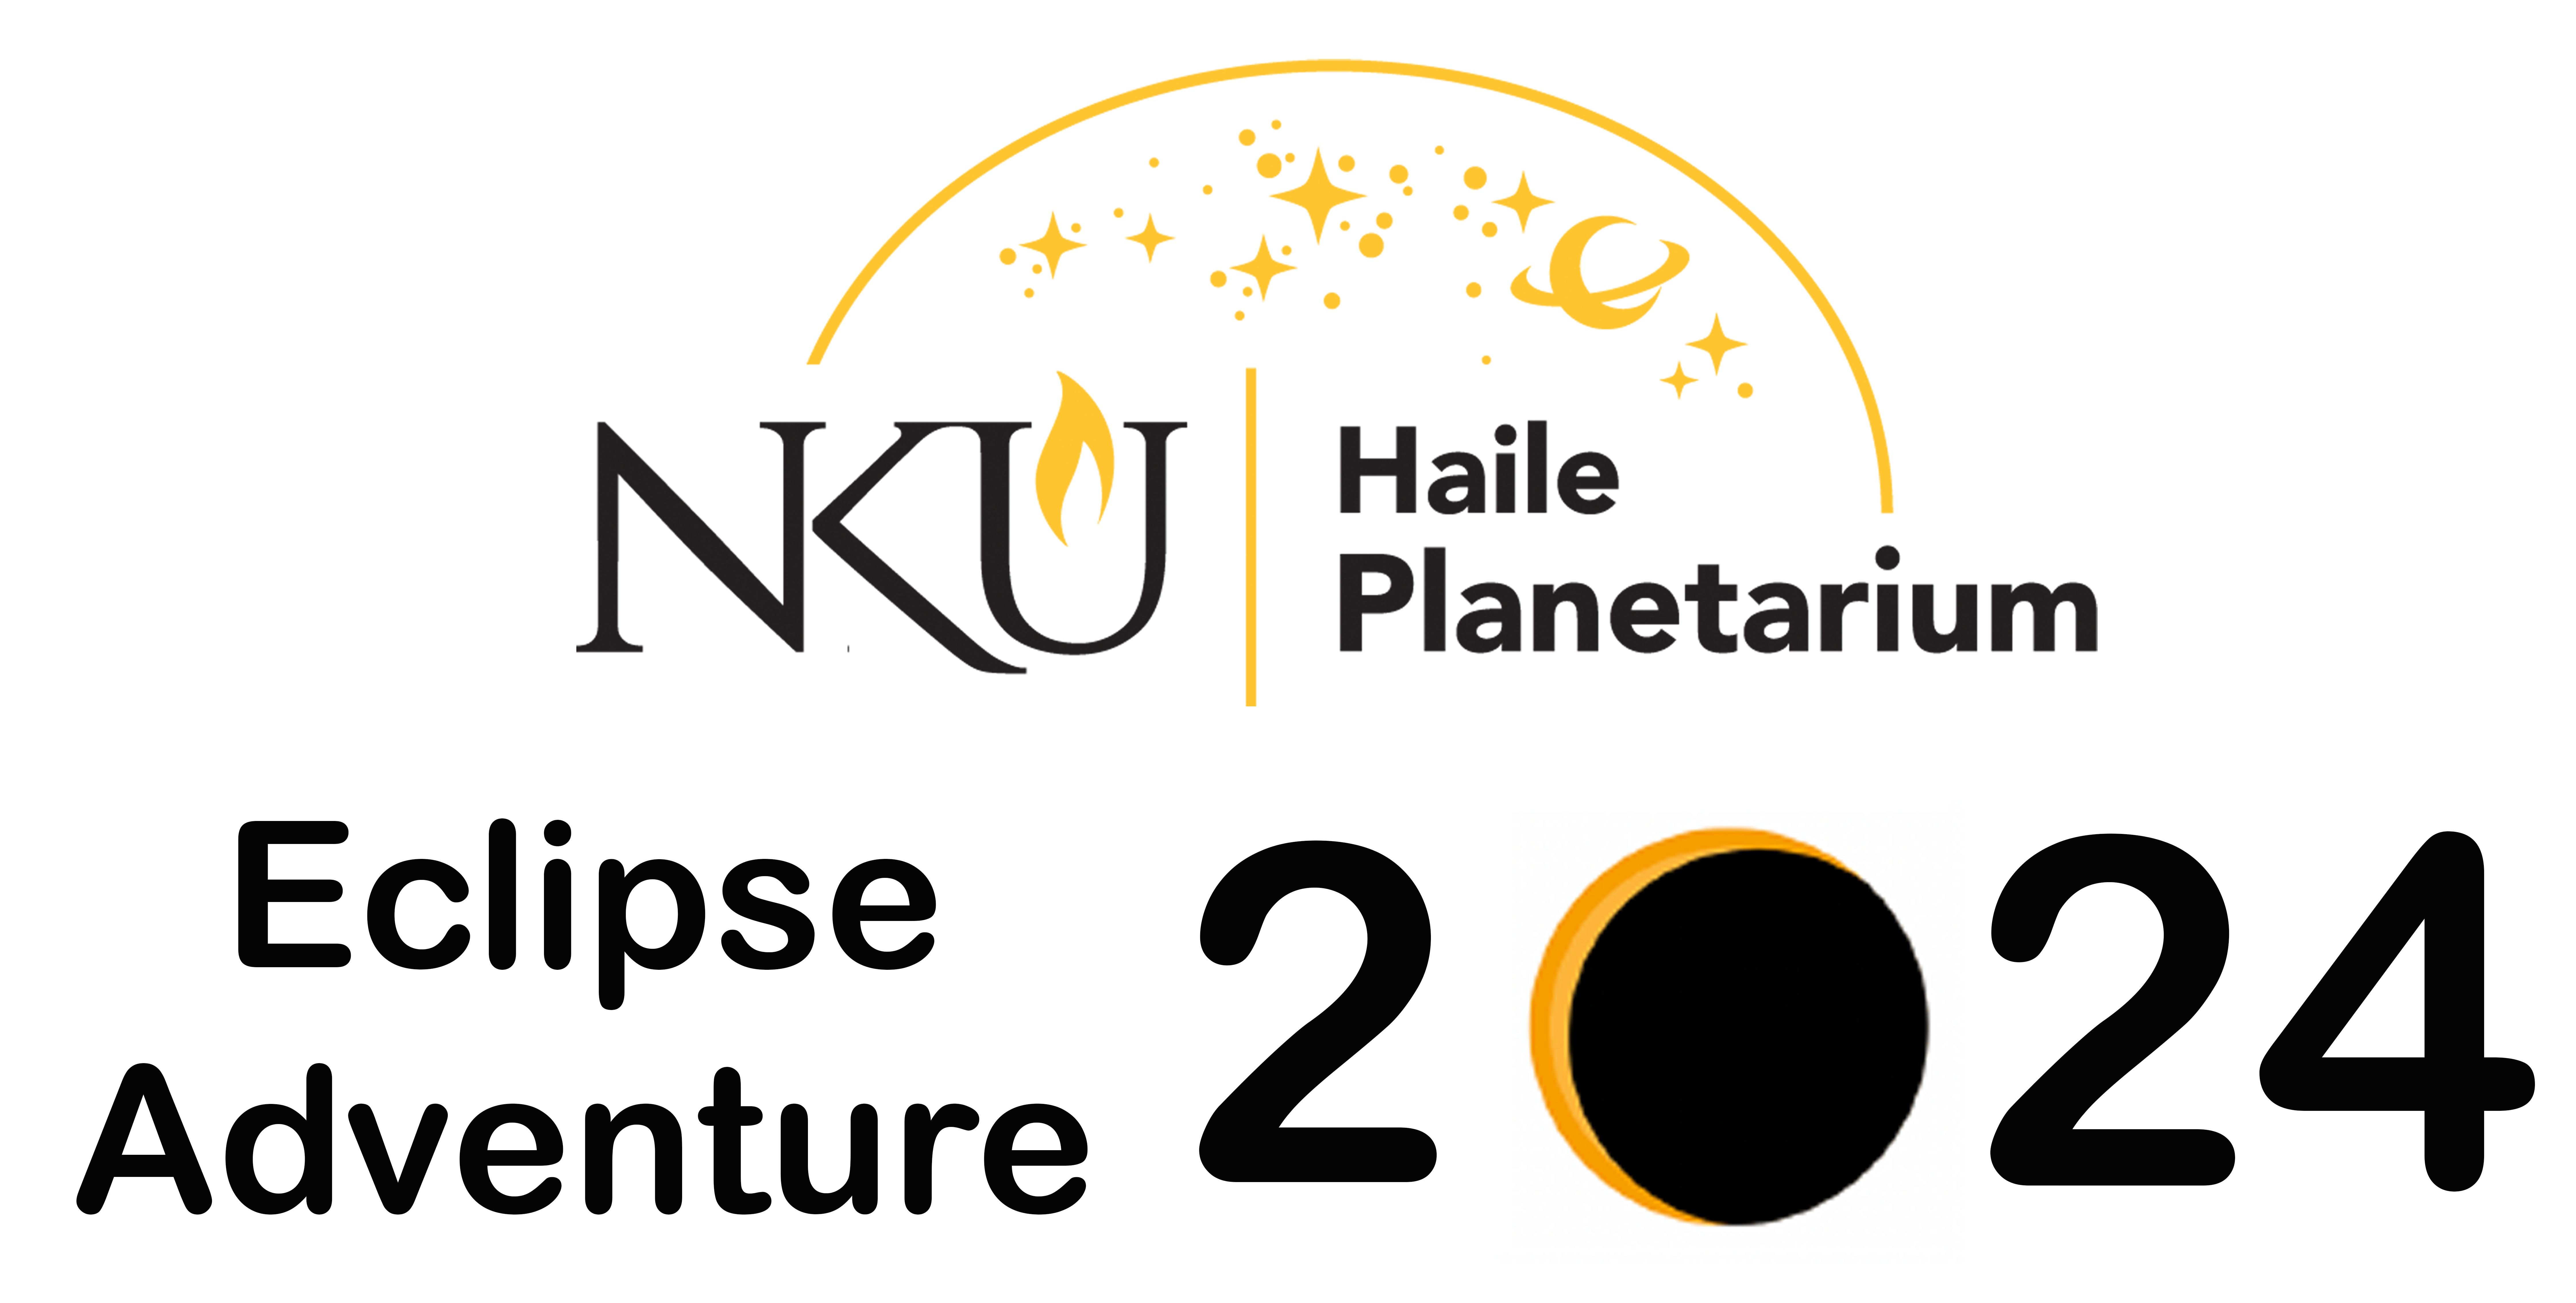 Haile Planetarium logo with the words Eclipse Adventure 2024 underneath. The 0 in 2024 is an image of a partial solar eclipse, a black circle with a gold circle of the same size mostly behind it, but with a sliver peeking out.